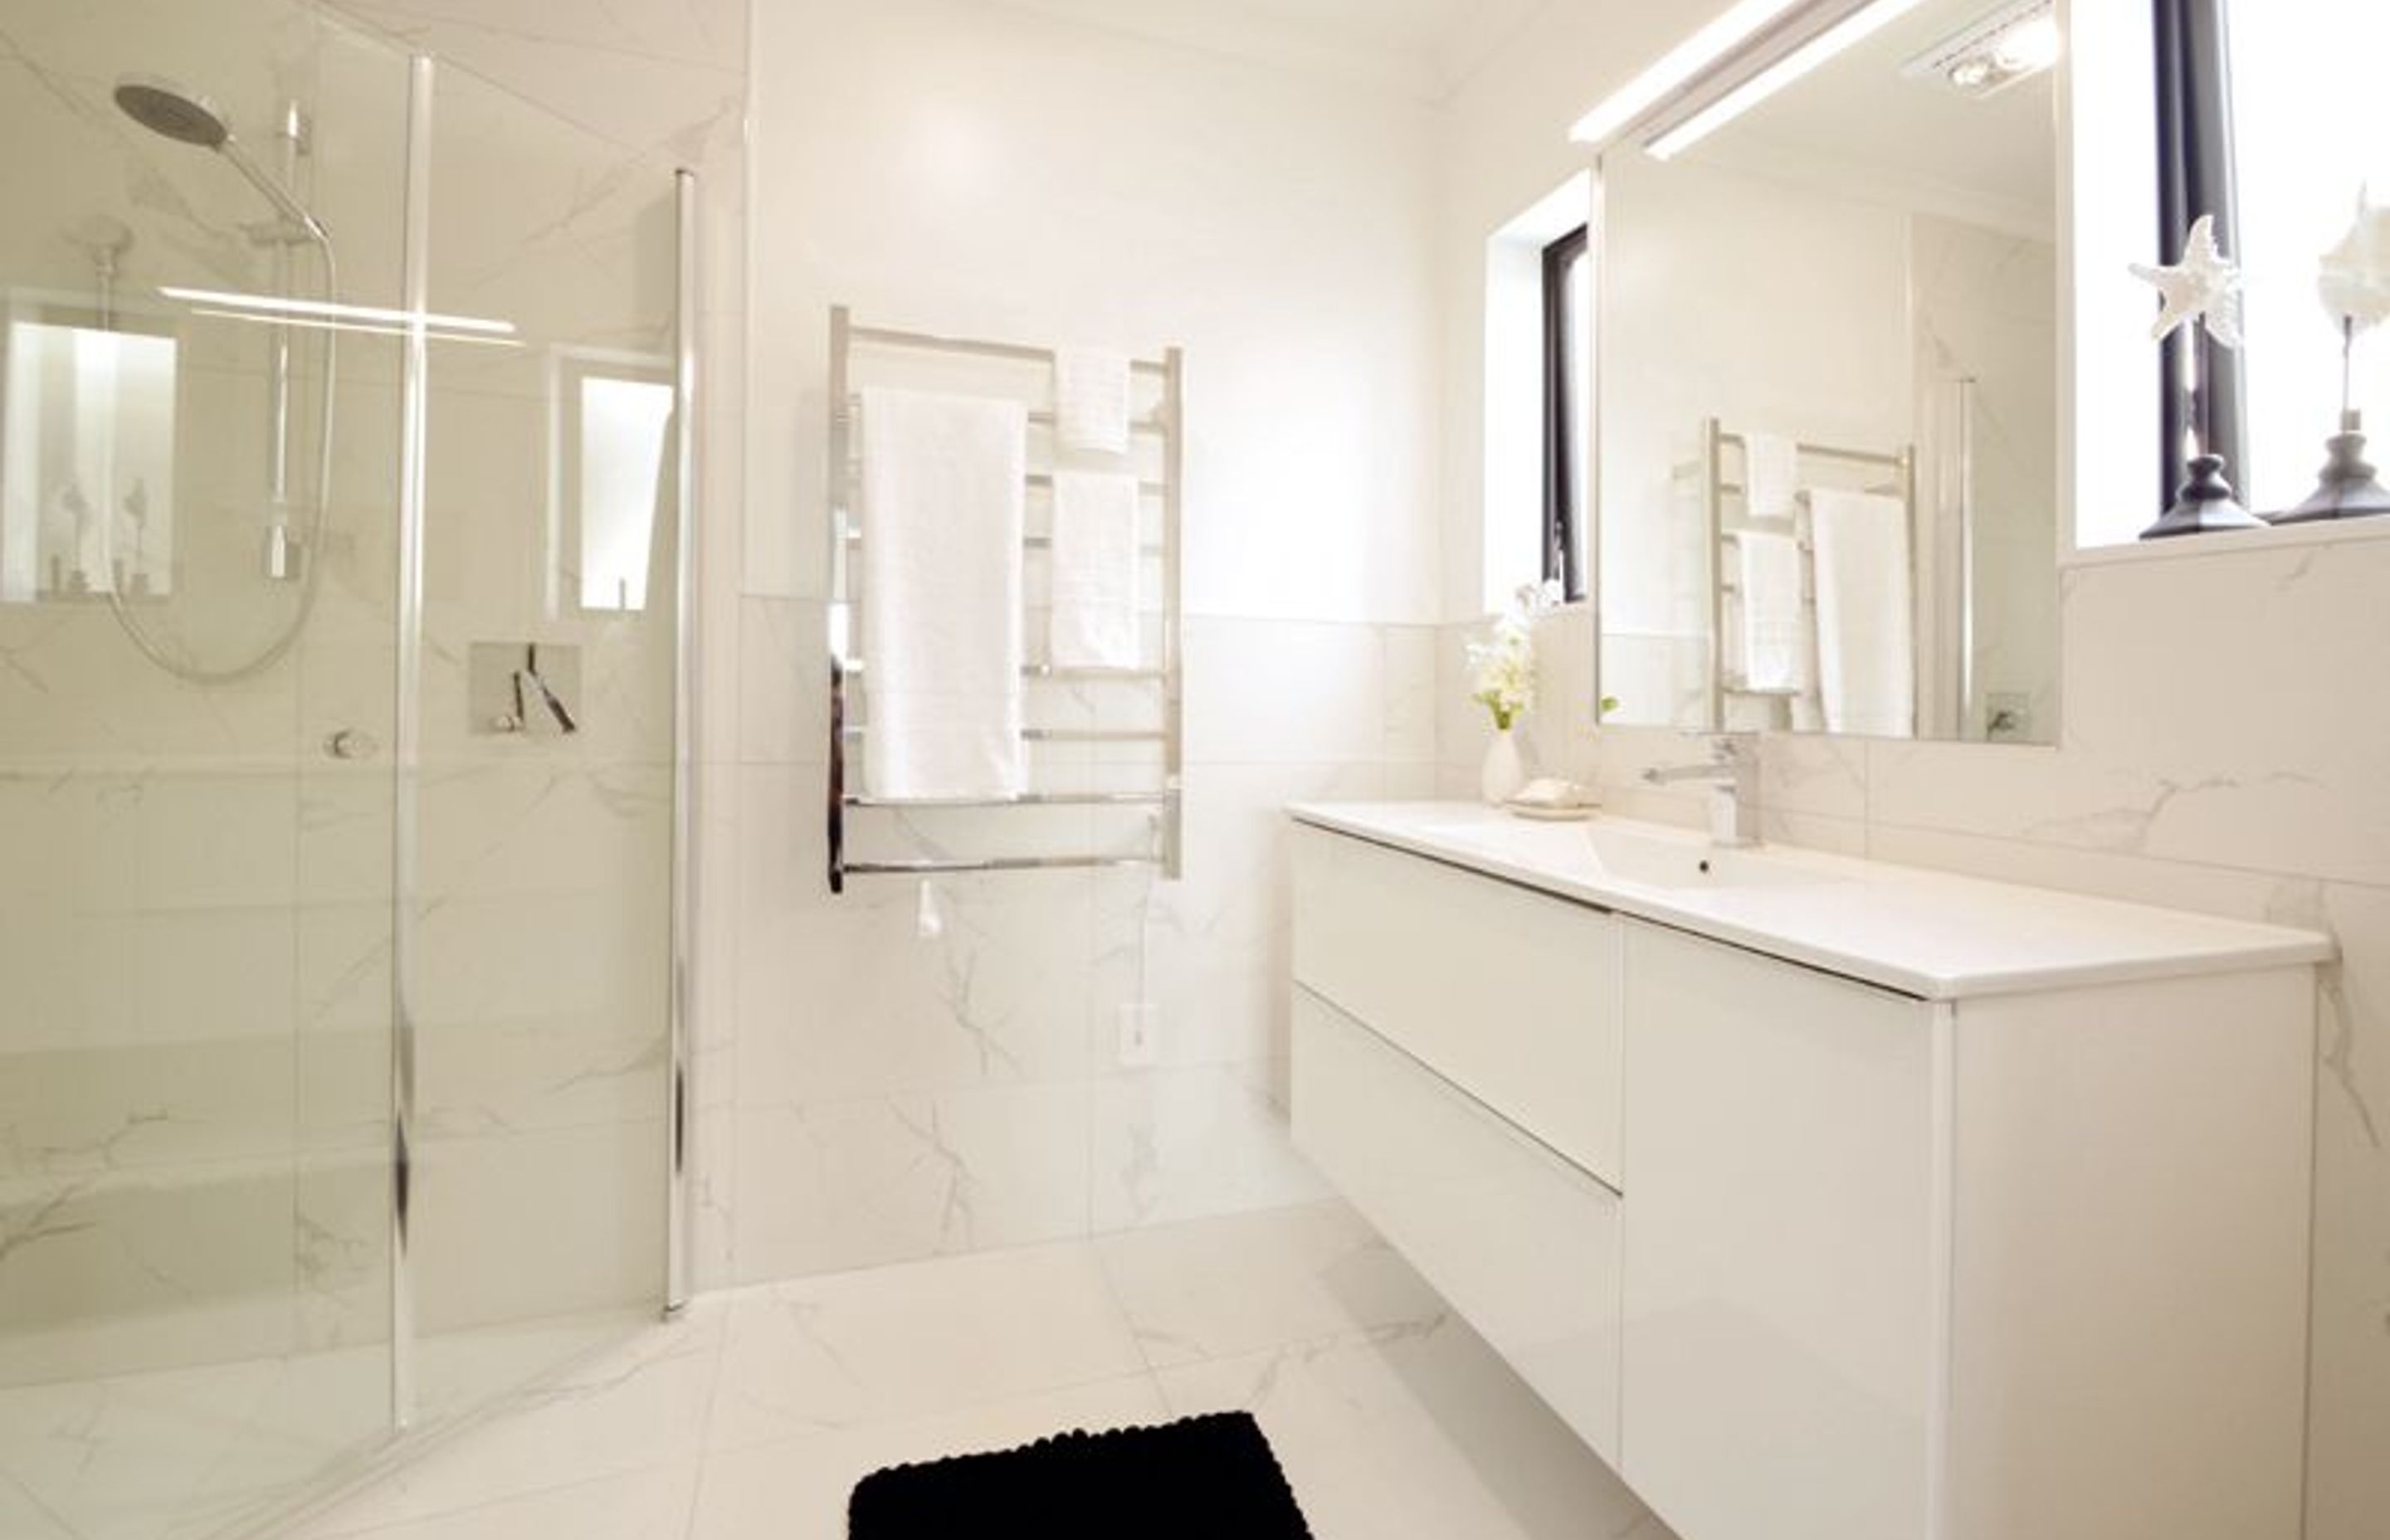 Master Ensuite - Beautiful glamourous master bathroom complete with space saving tiled shower